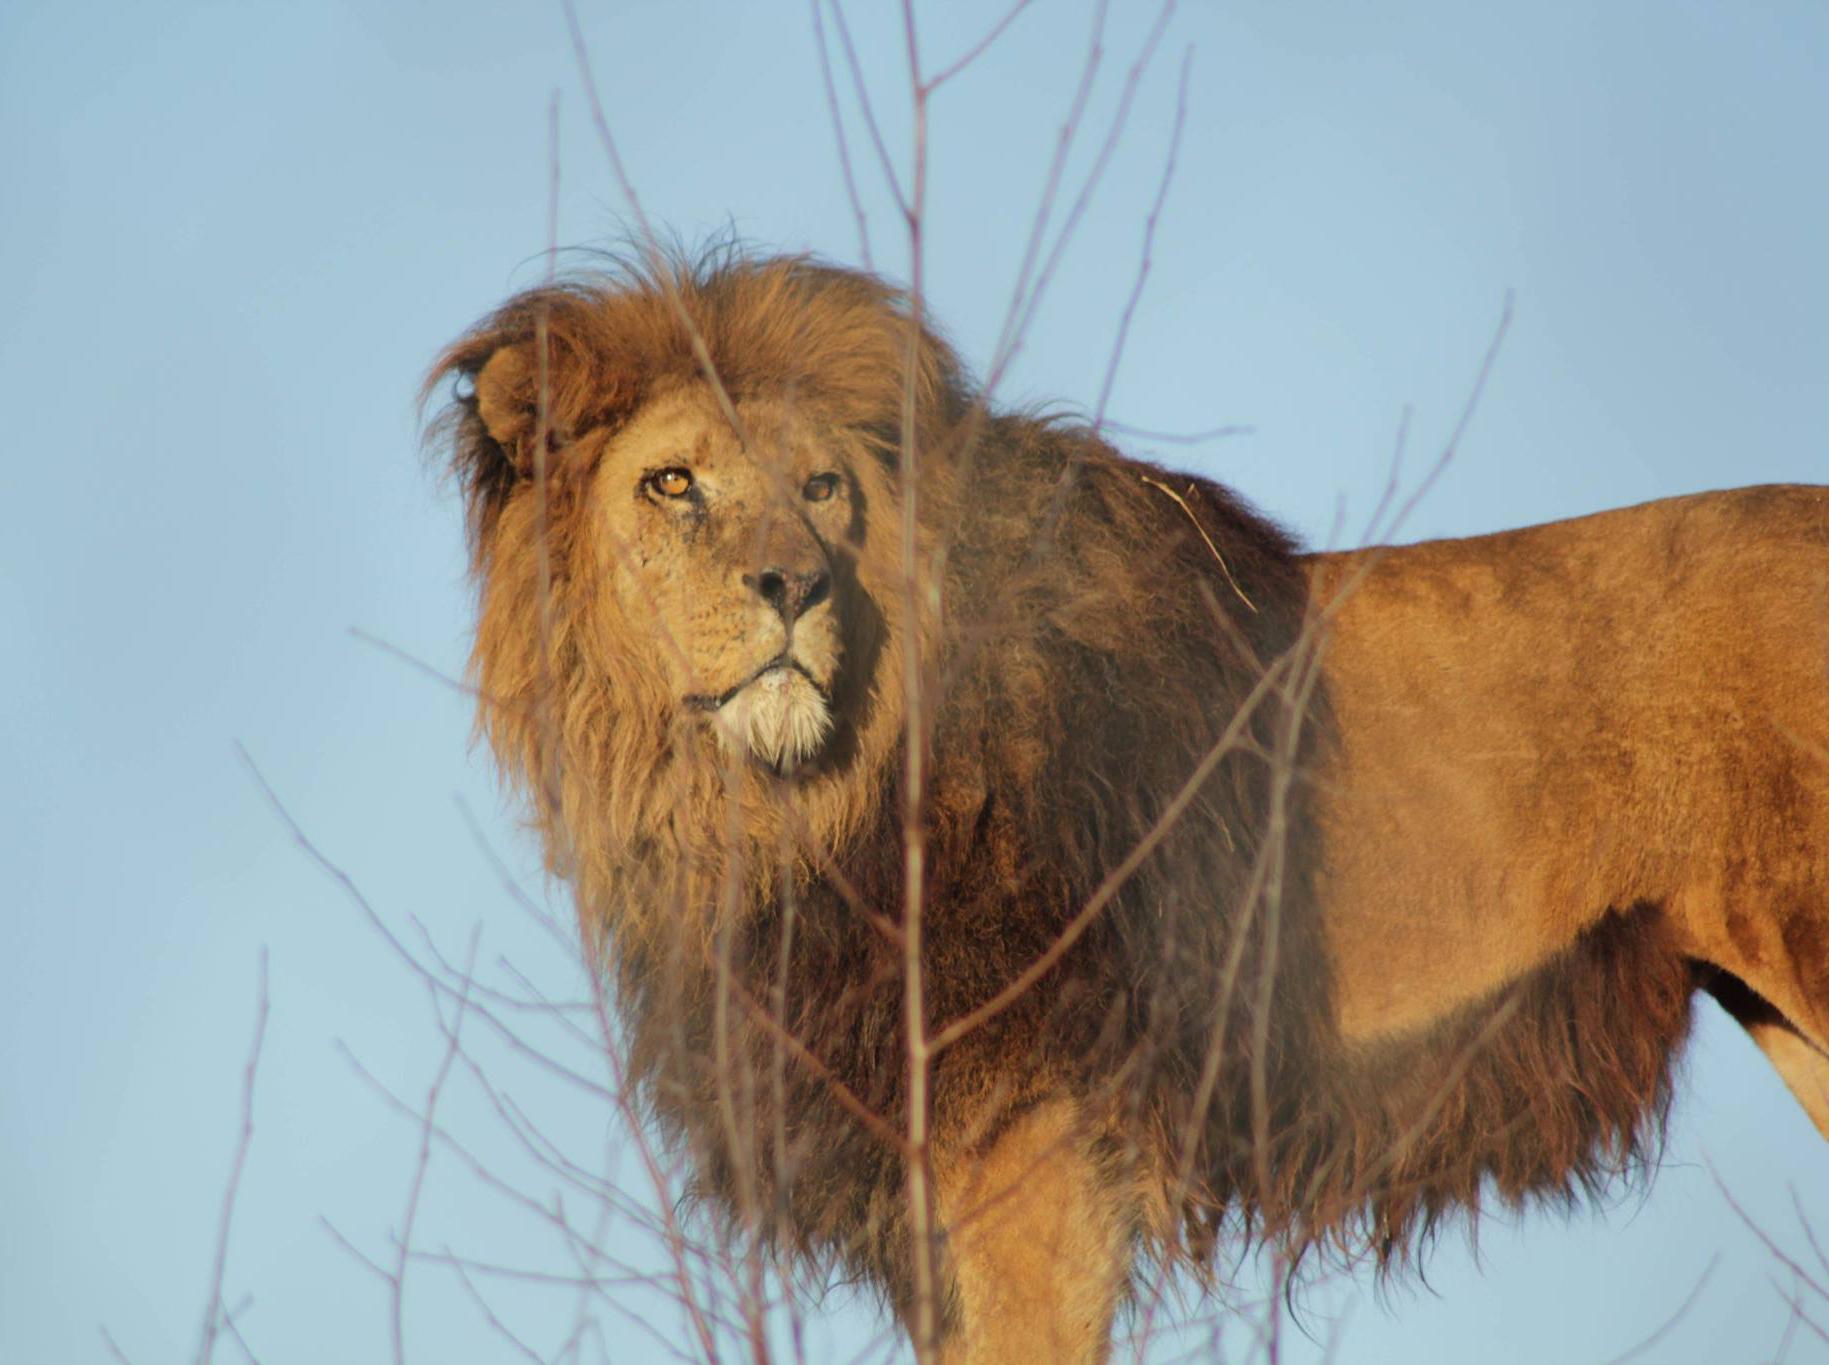 Picture of a lion taken from the official Facebook page of South Lakes Safari Zoo